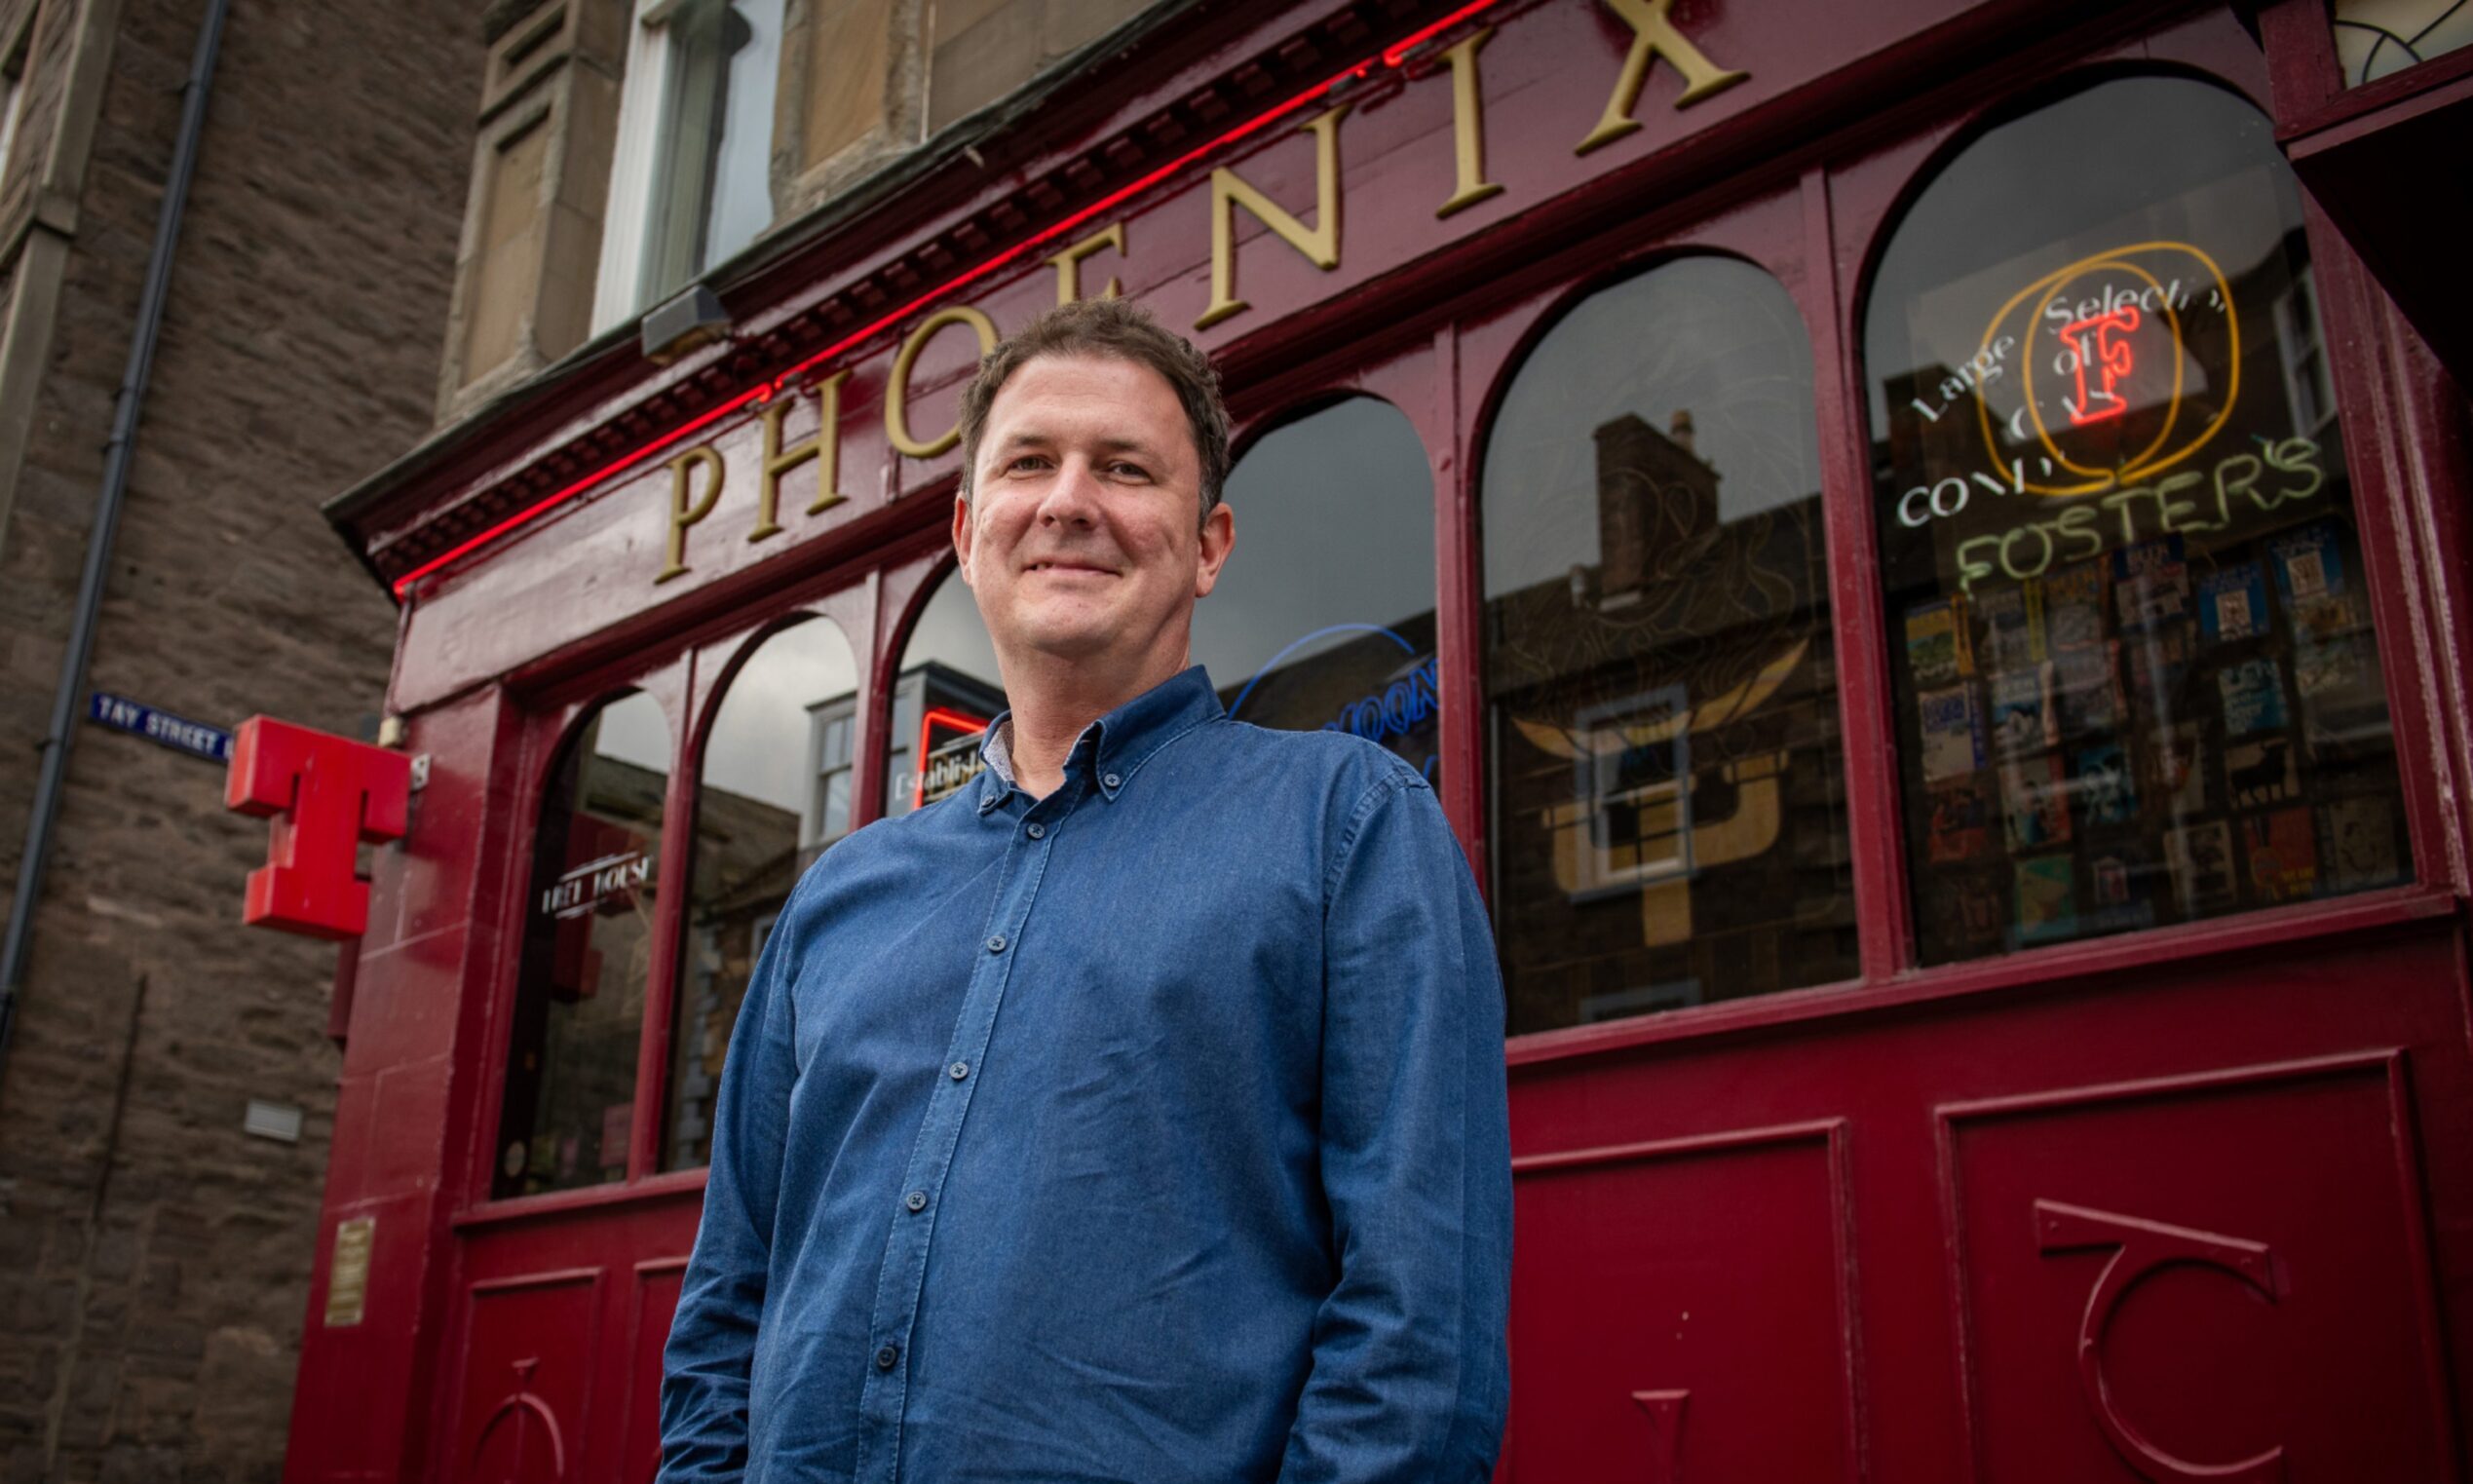 Andy Robertson outside The Phoenix. Image: Kim Cessford/DC Thomson.